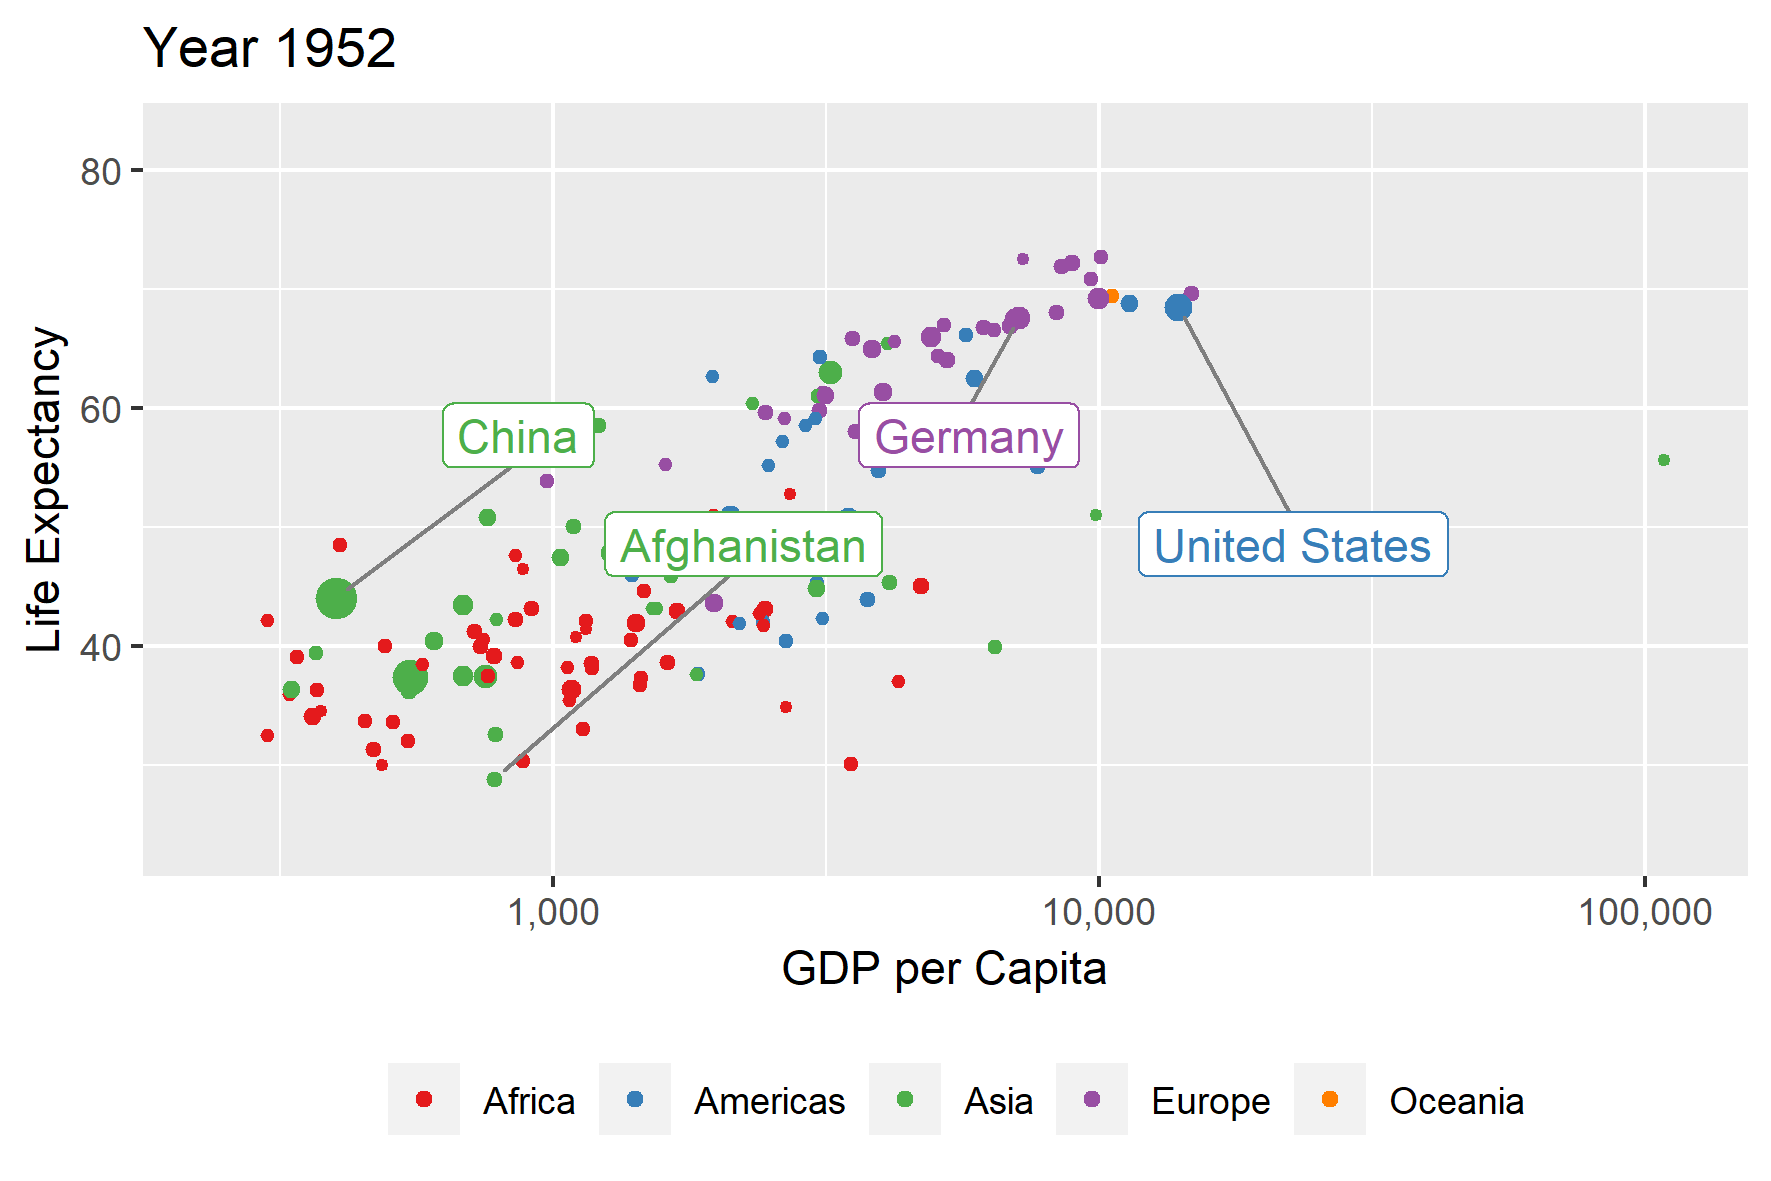 A homage to Hans Rosling's visualization of the [evolution of life expectancy and GDP per capita](https://www.youtube.com/watch?v=jbkSRLYSojo) for countries around the world. The different sizes of the bubbles indicate the size of a country's population.